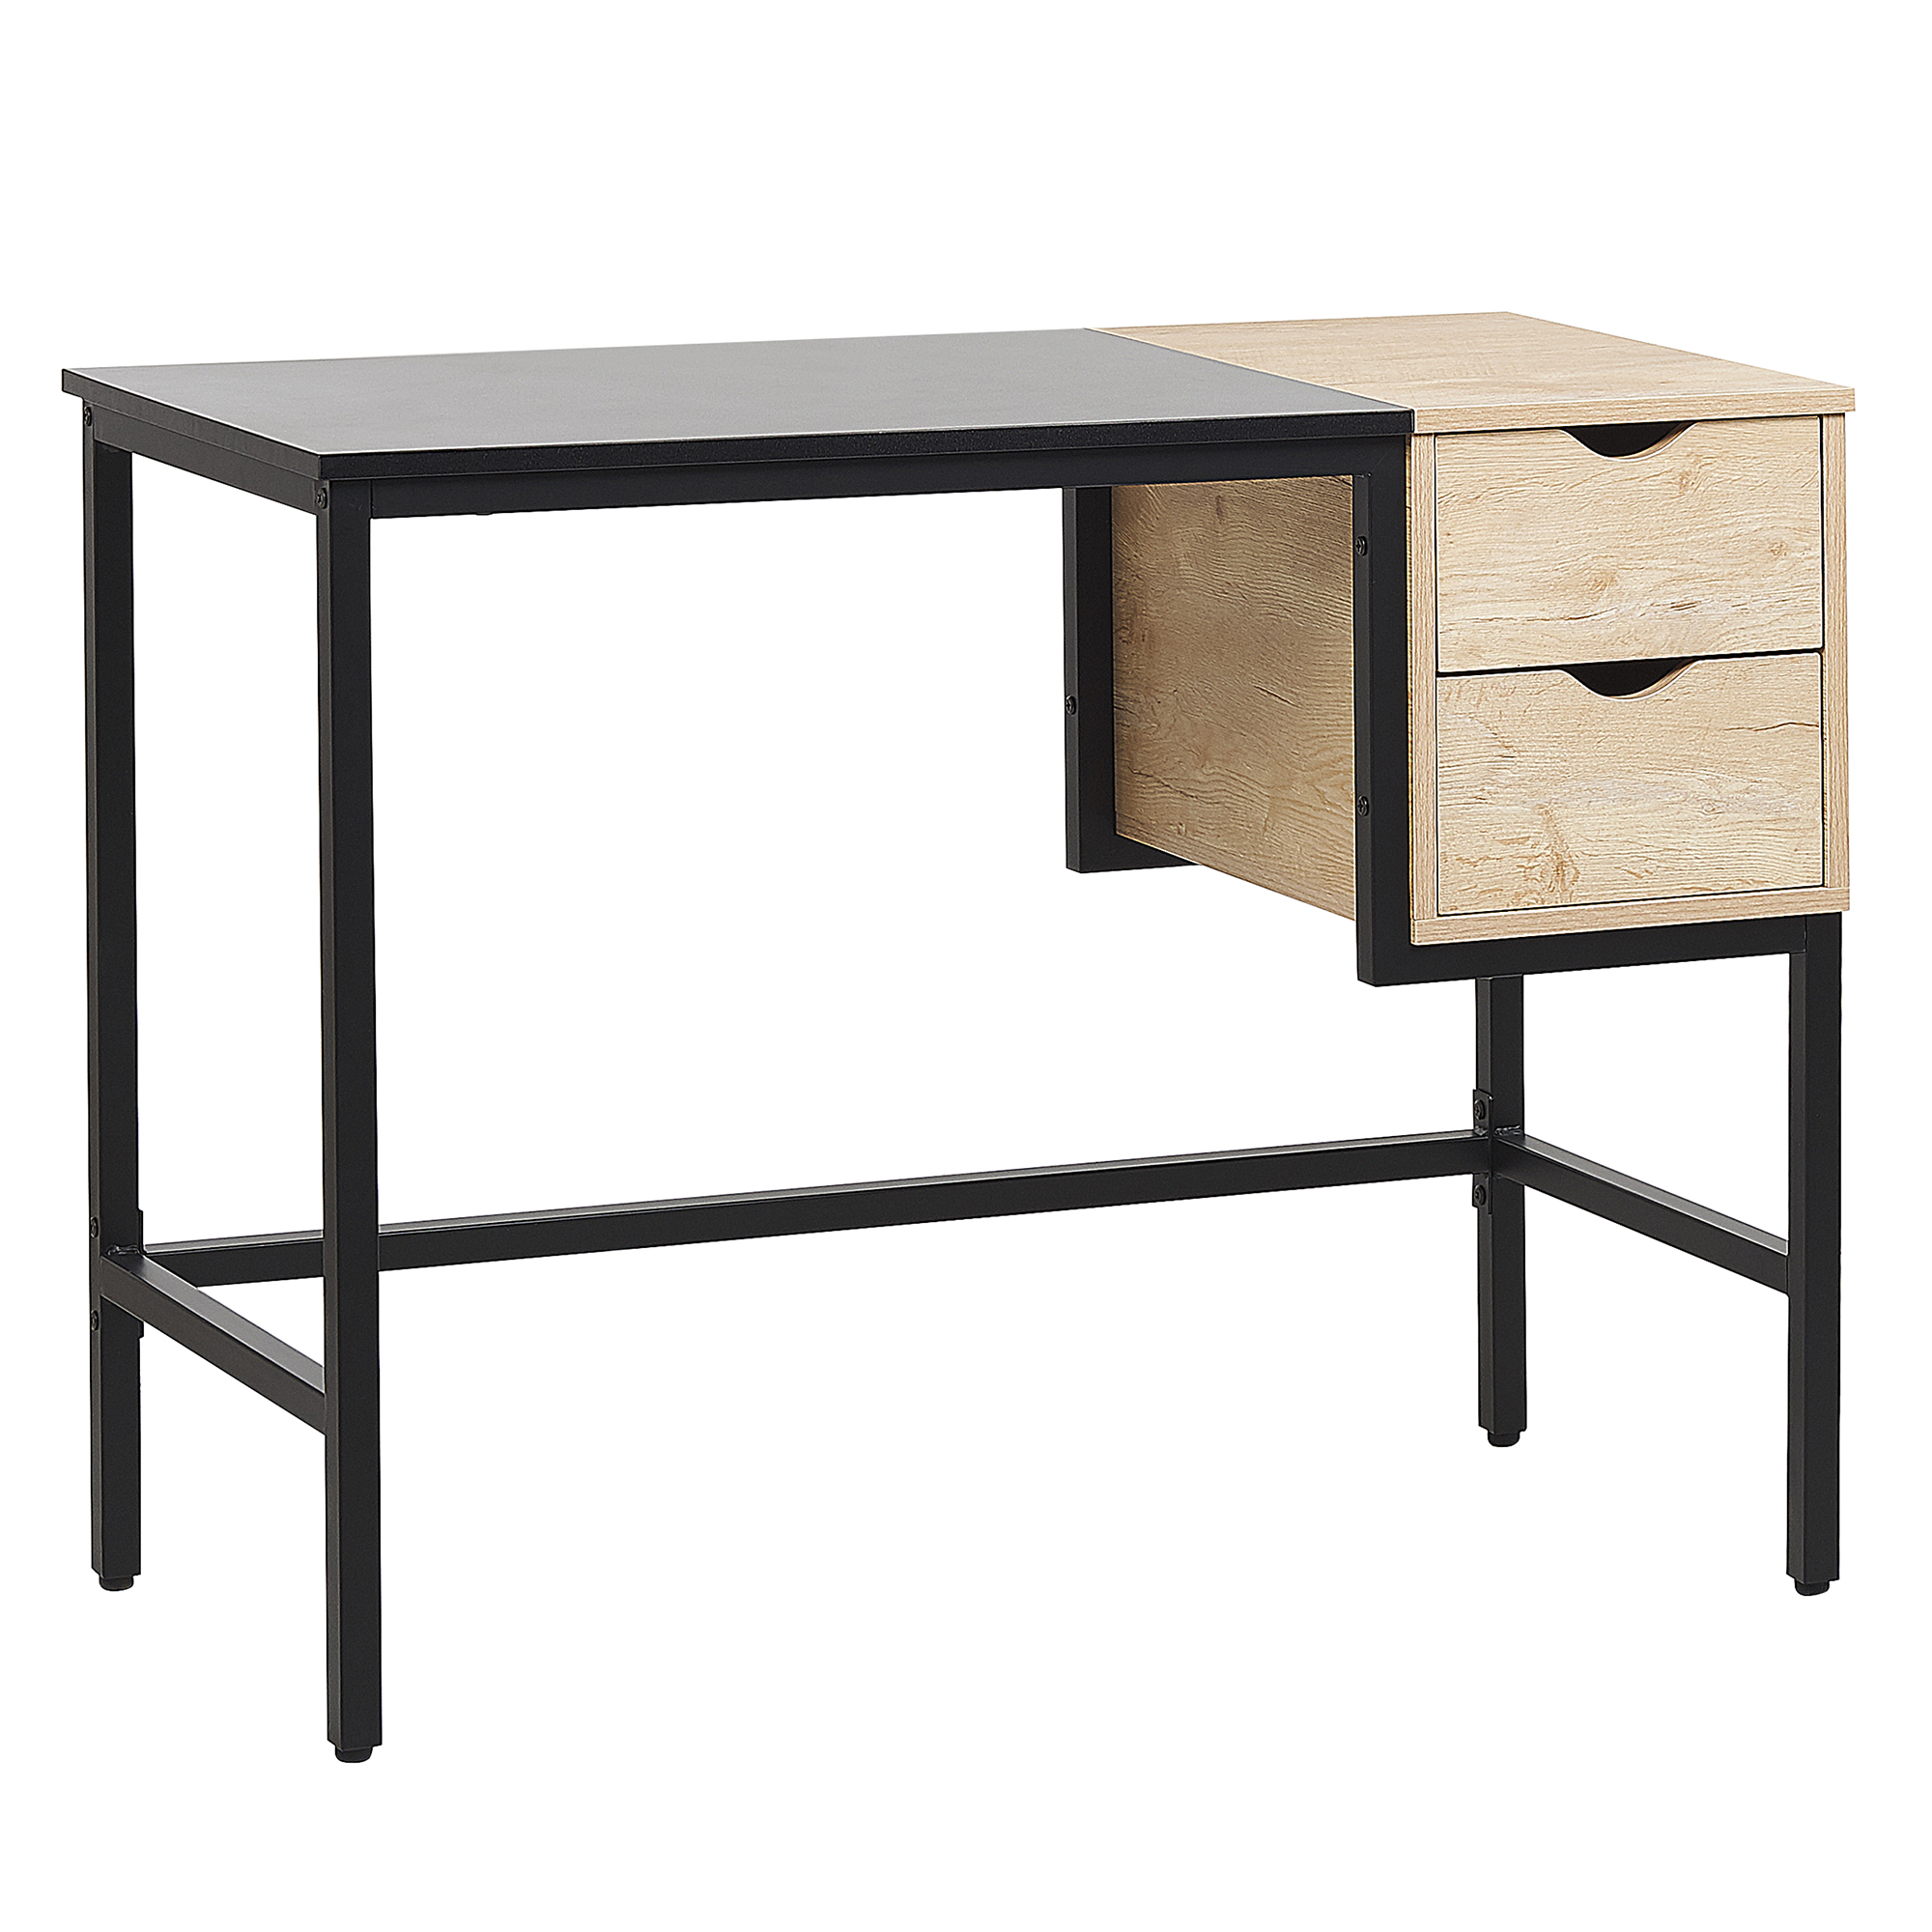 Beliani Home Office Desk Black with Light Wood Metal Frame 100 x 48 cm Storage Compartment 2 Drawers PVC Top